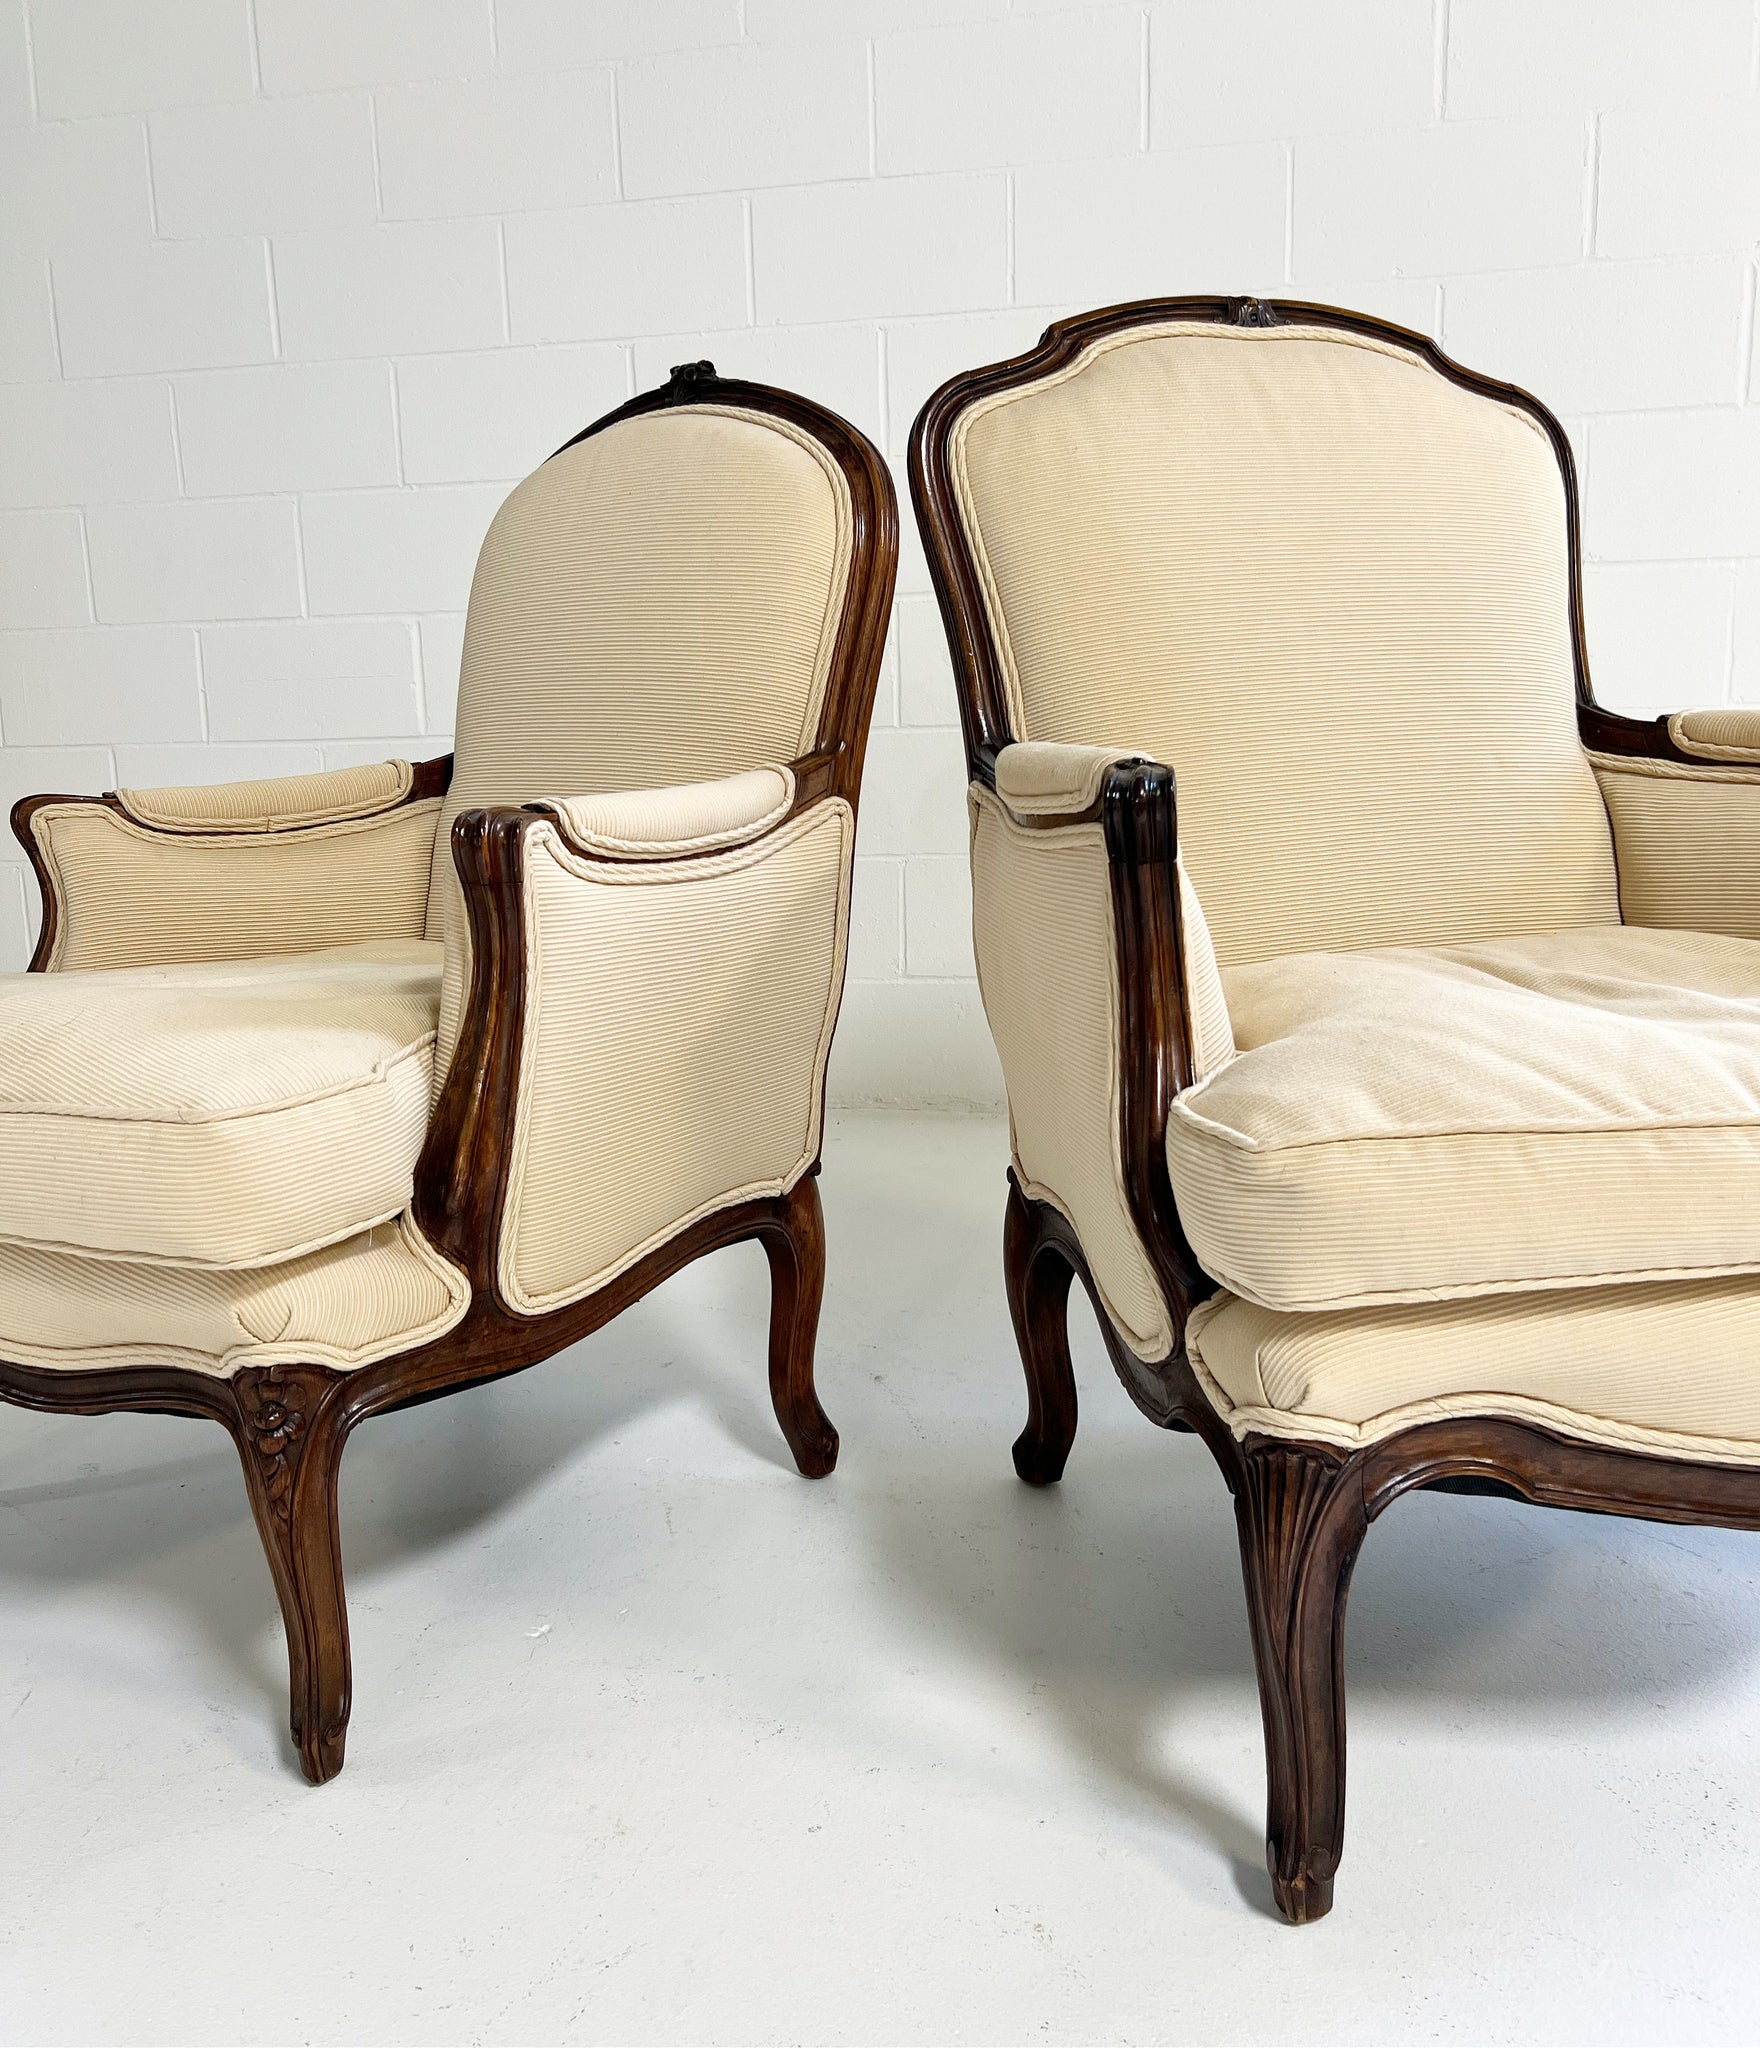 Louis XVI Style His and Hers Lounge Chairs, Pair